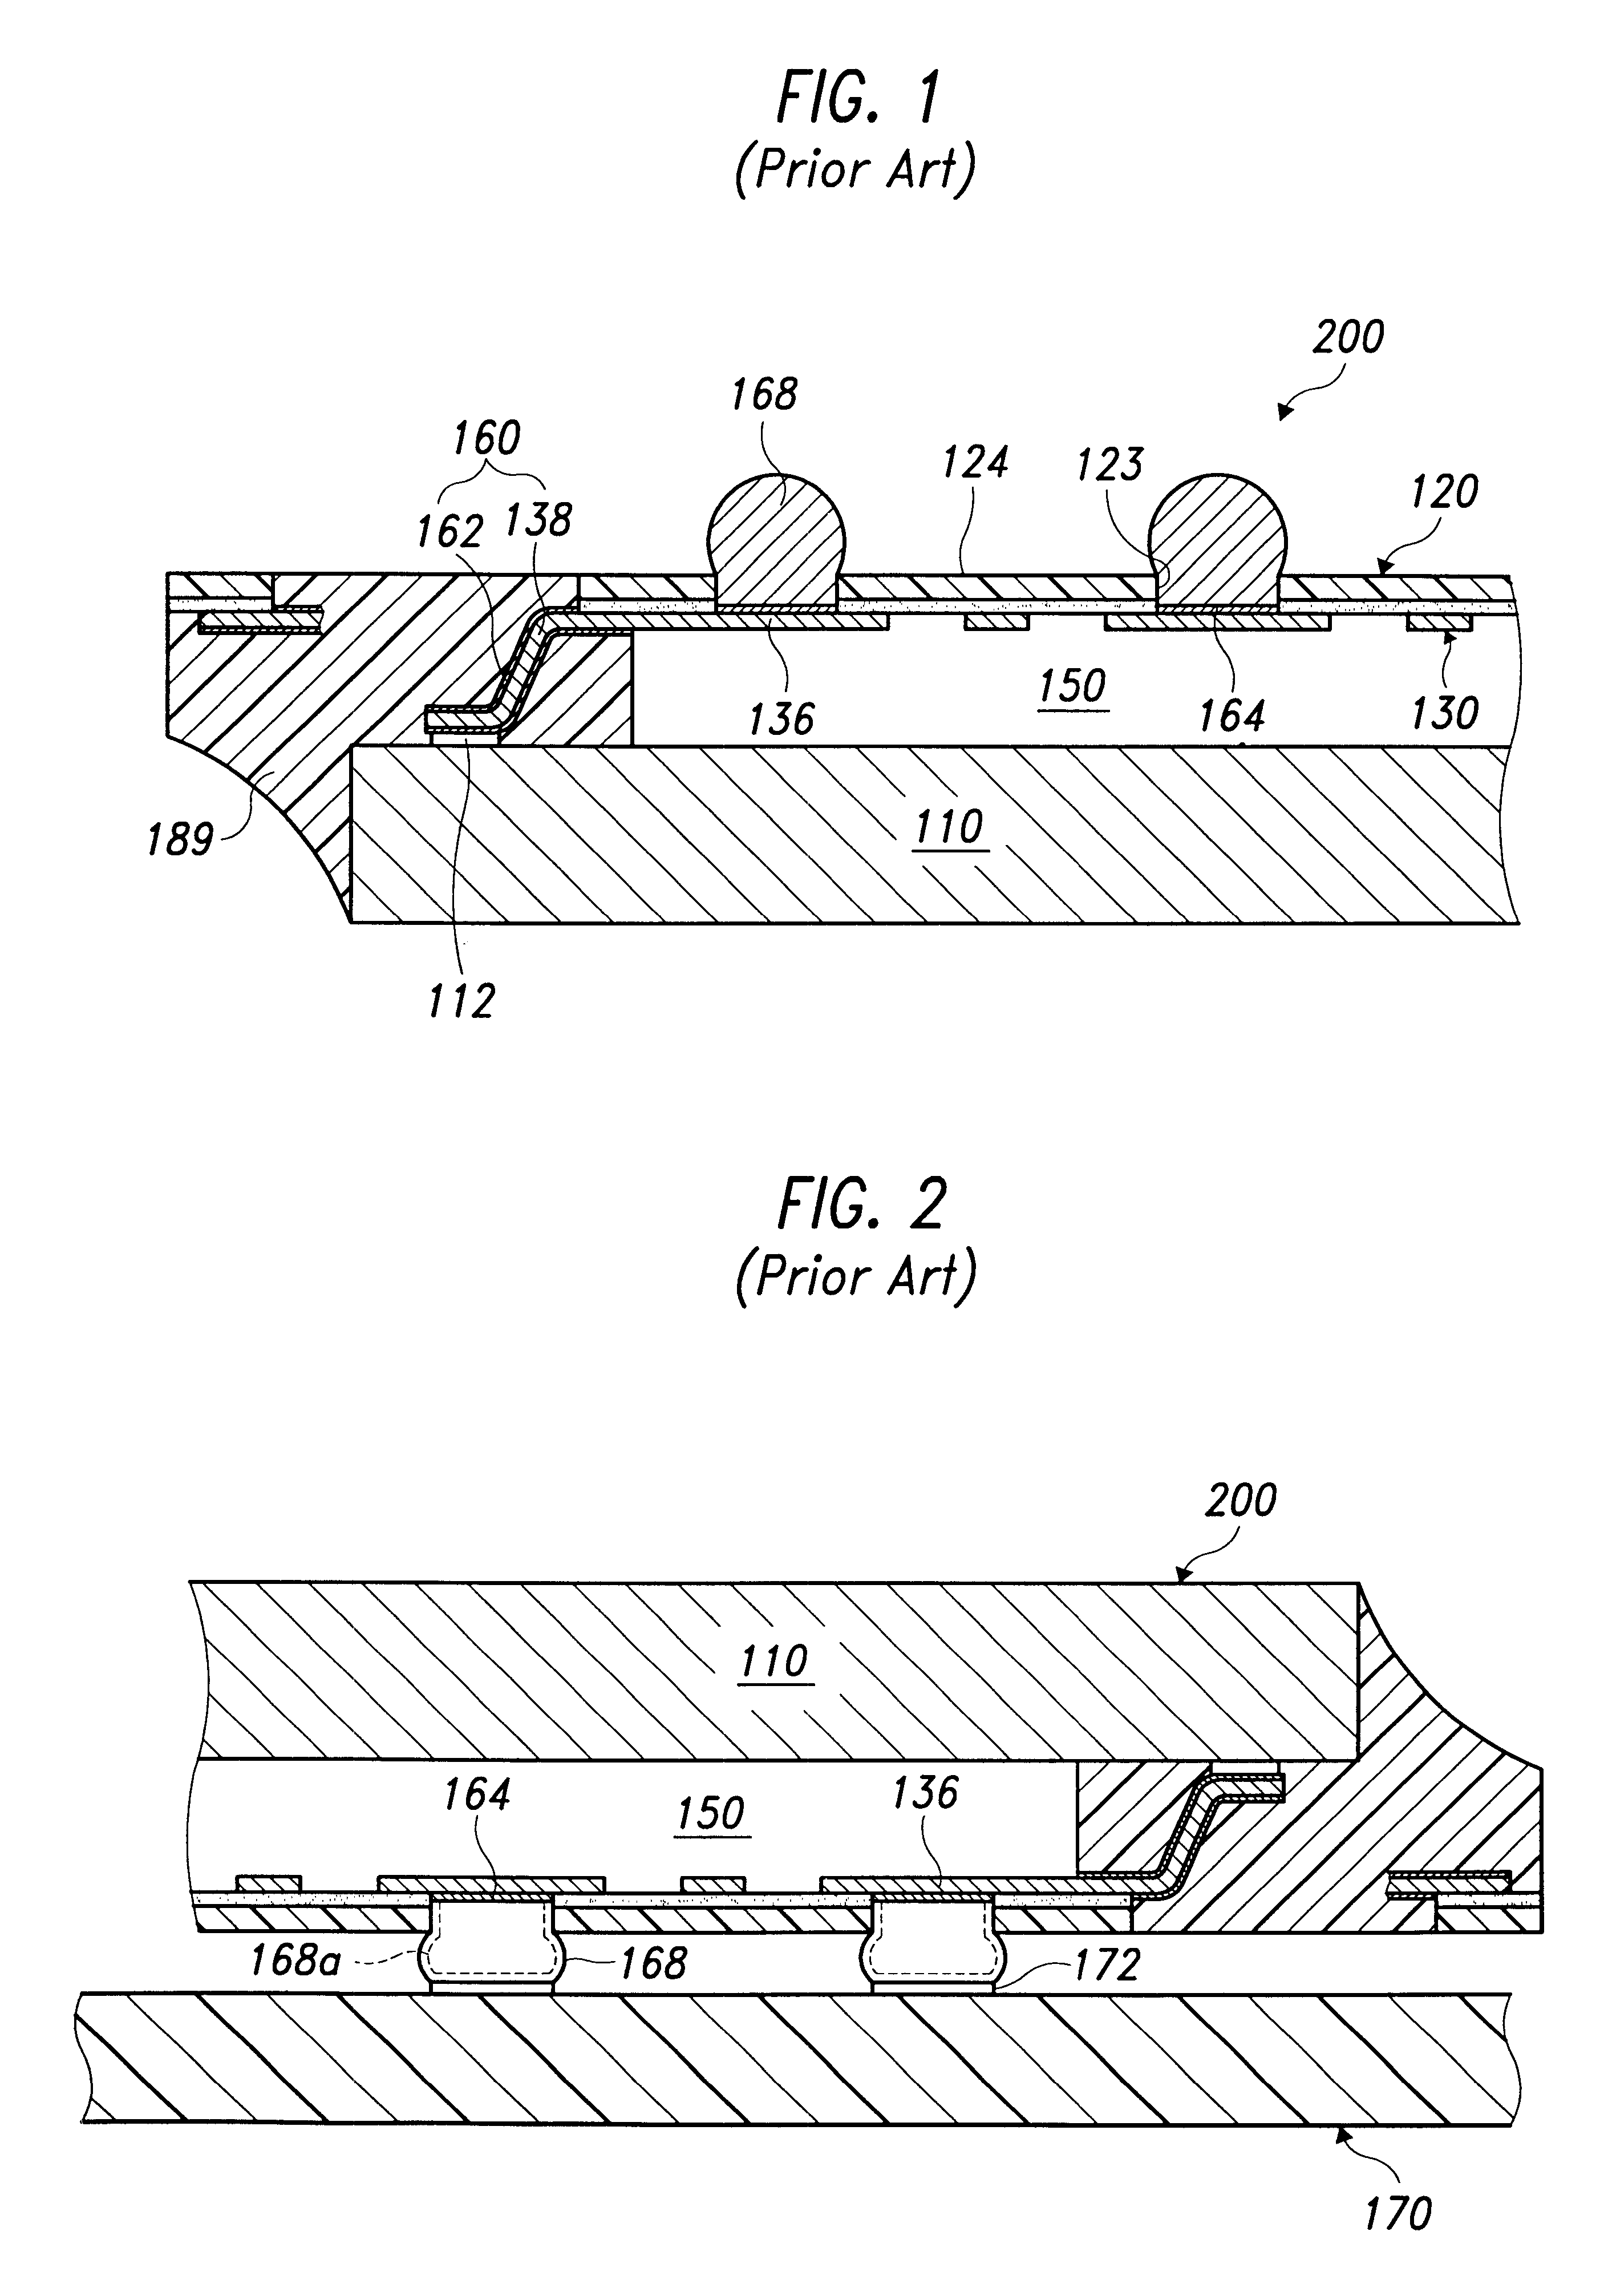 Method for manufacturing a chip scale package having copper traces selectively plated with gold